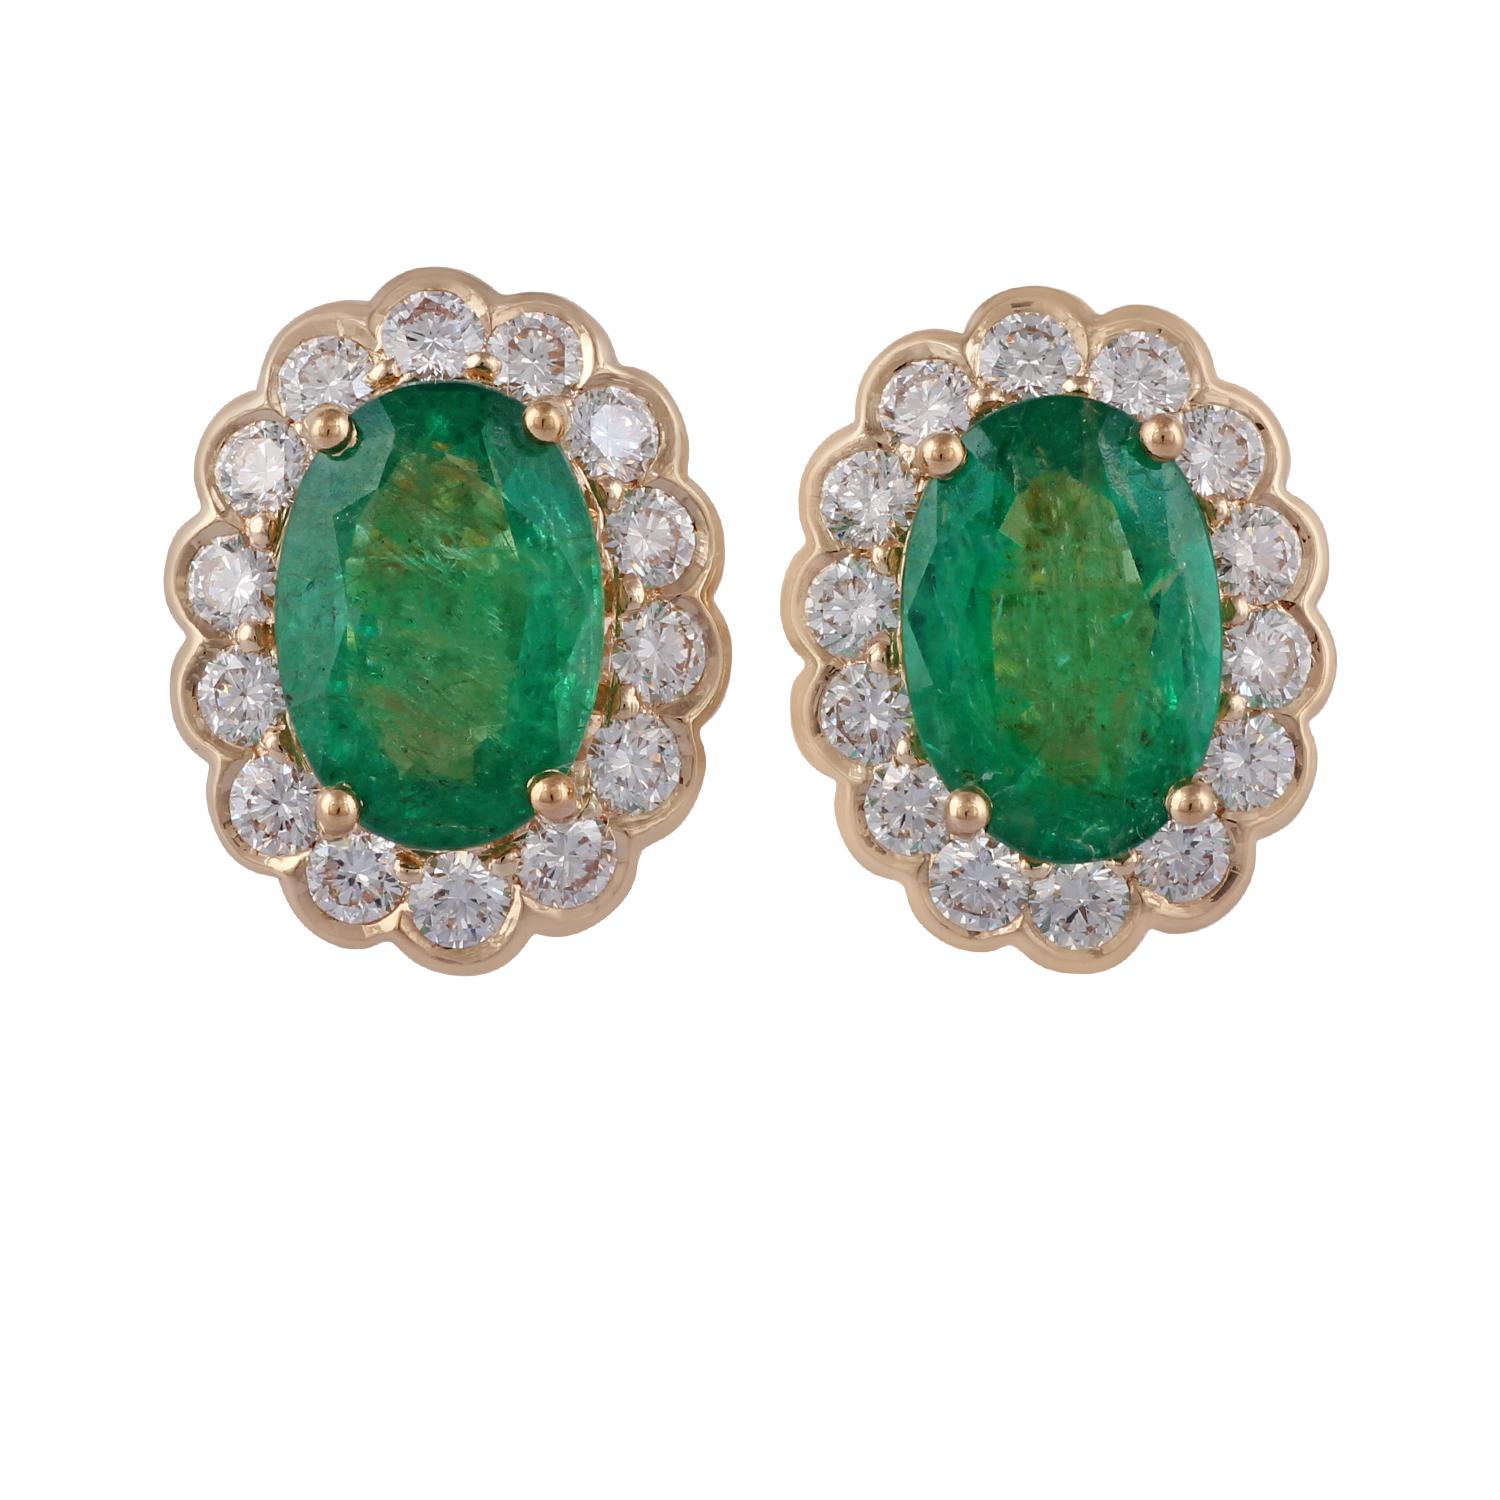 An exclusive pair of earrings with oval-shaped emerald 3.43 carat surrounded by the cluster of diamonds features 28 brilliant-cut round diamonds 1.18 carat the entire earring is studded in 18 karat yellow gold weight 6.47 grams, these earrings have